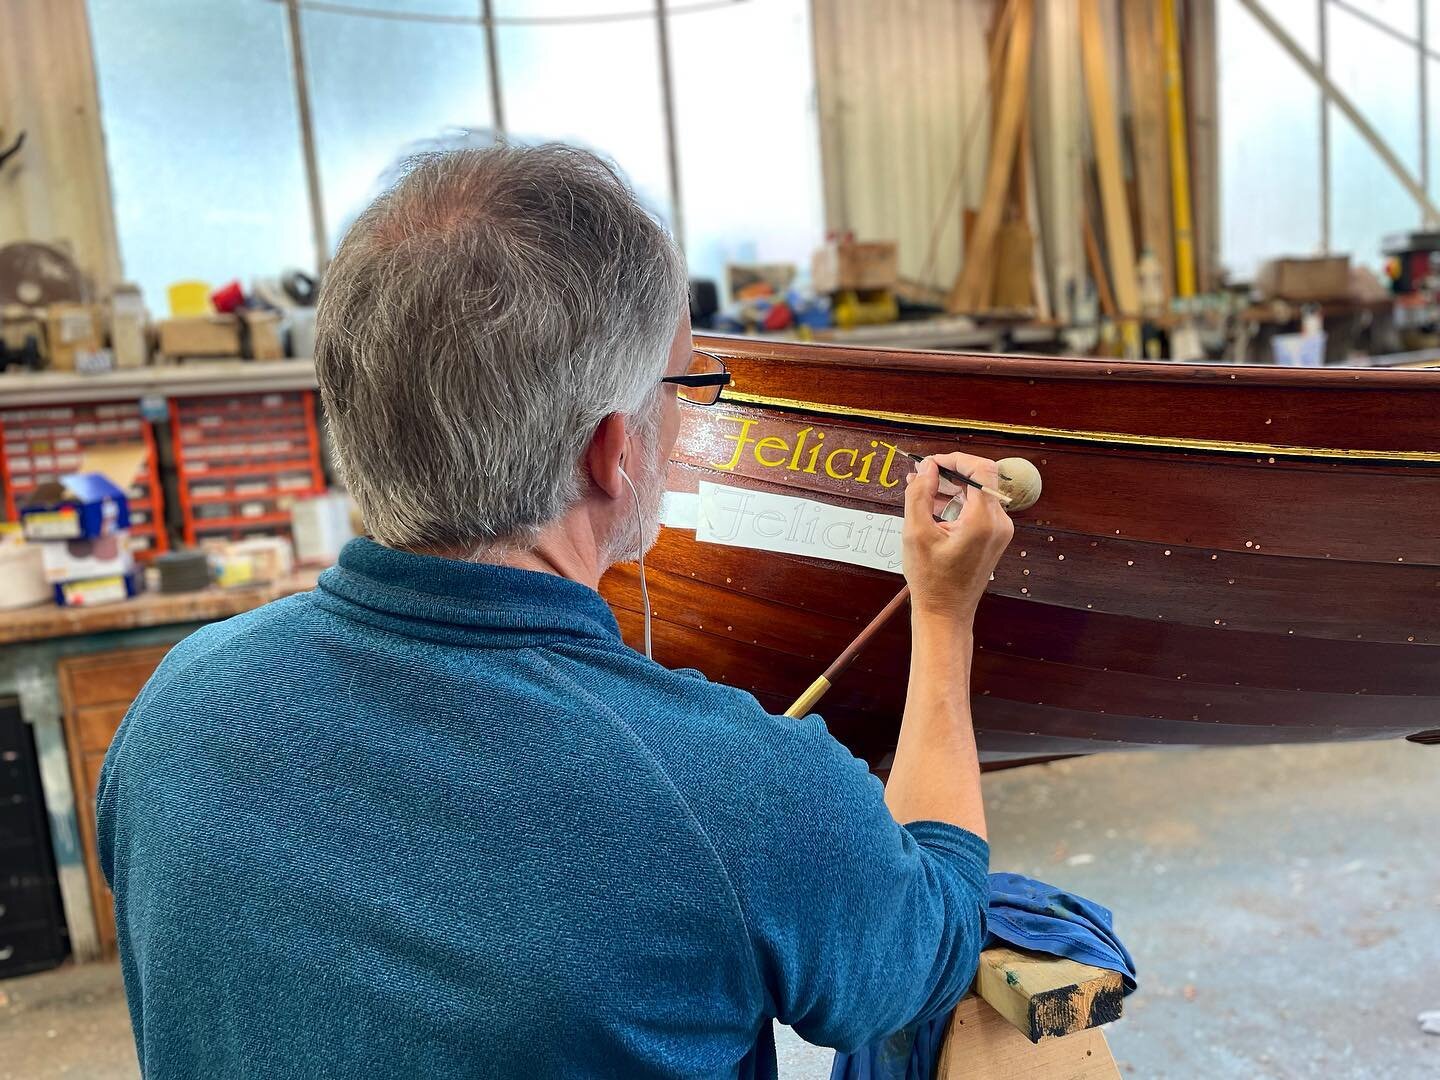 Always a pleasure having Tim in sign writing. #signwriting #signwriter #handpainted #skills #boatbuilding #boatyard #boats #classicboats #thames #riverthames #woodenboatbuilders #woodenboats #woottens